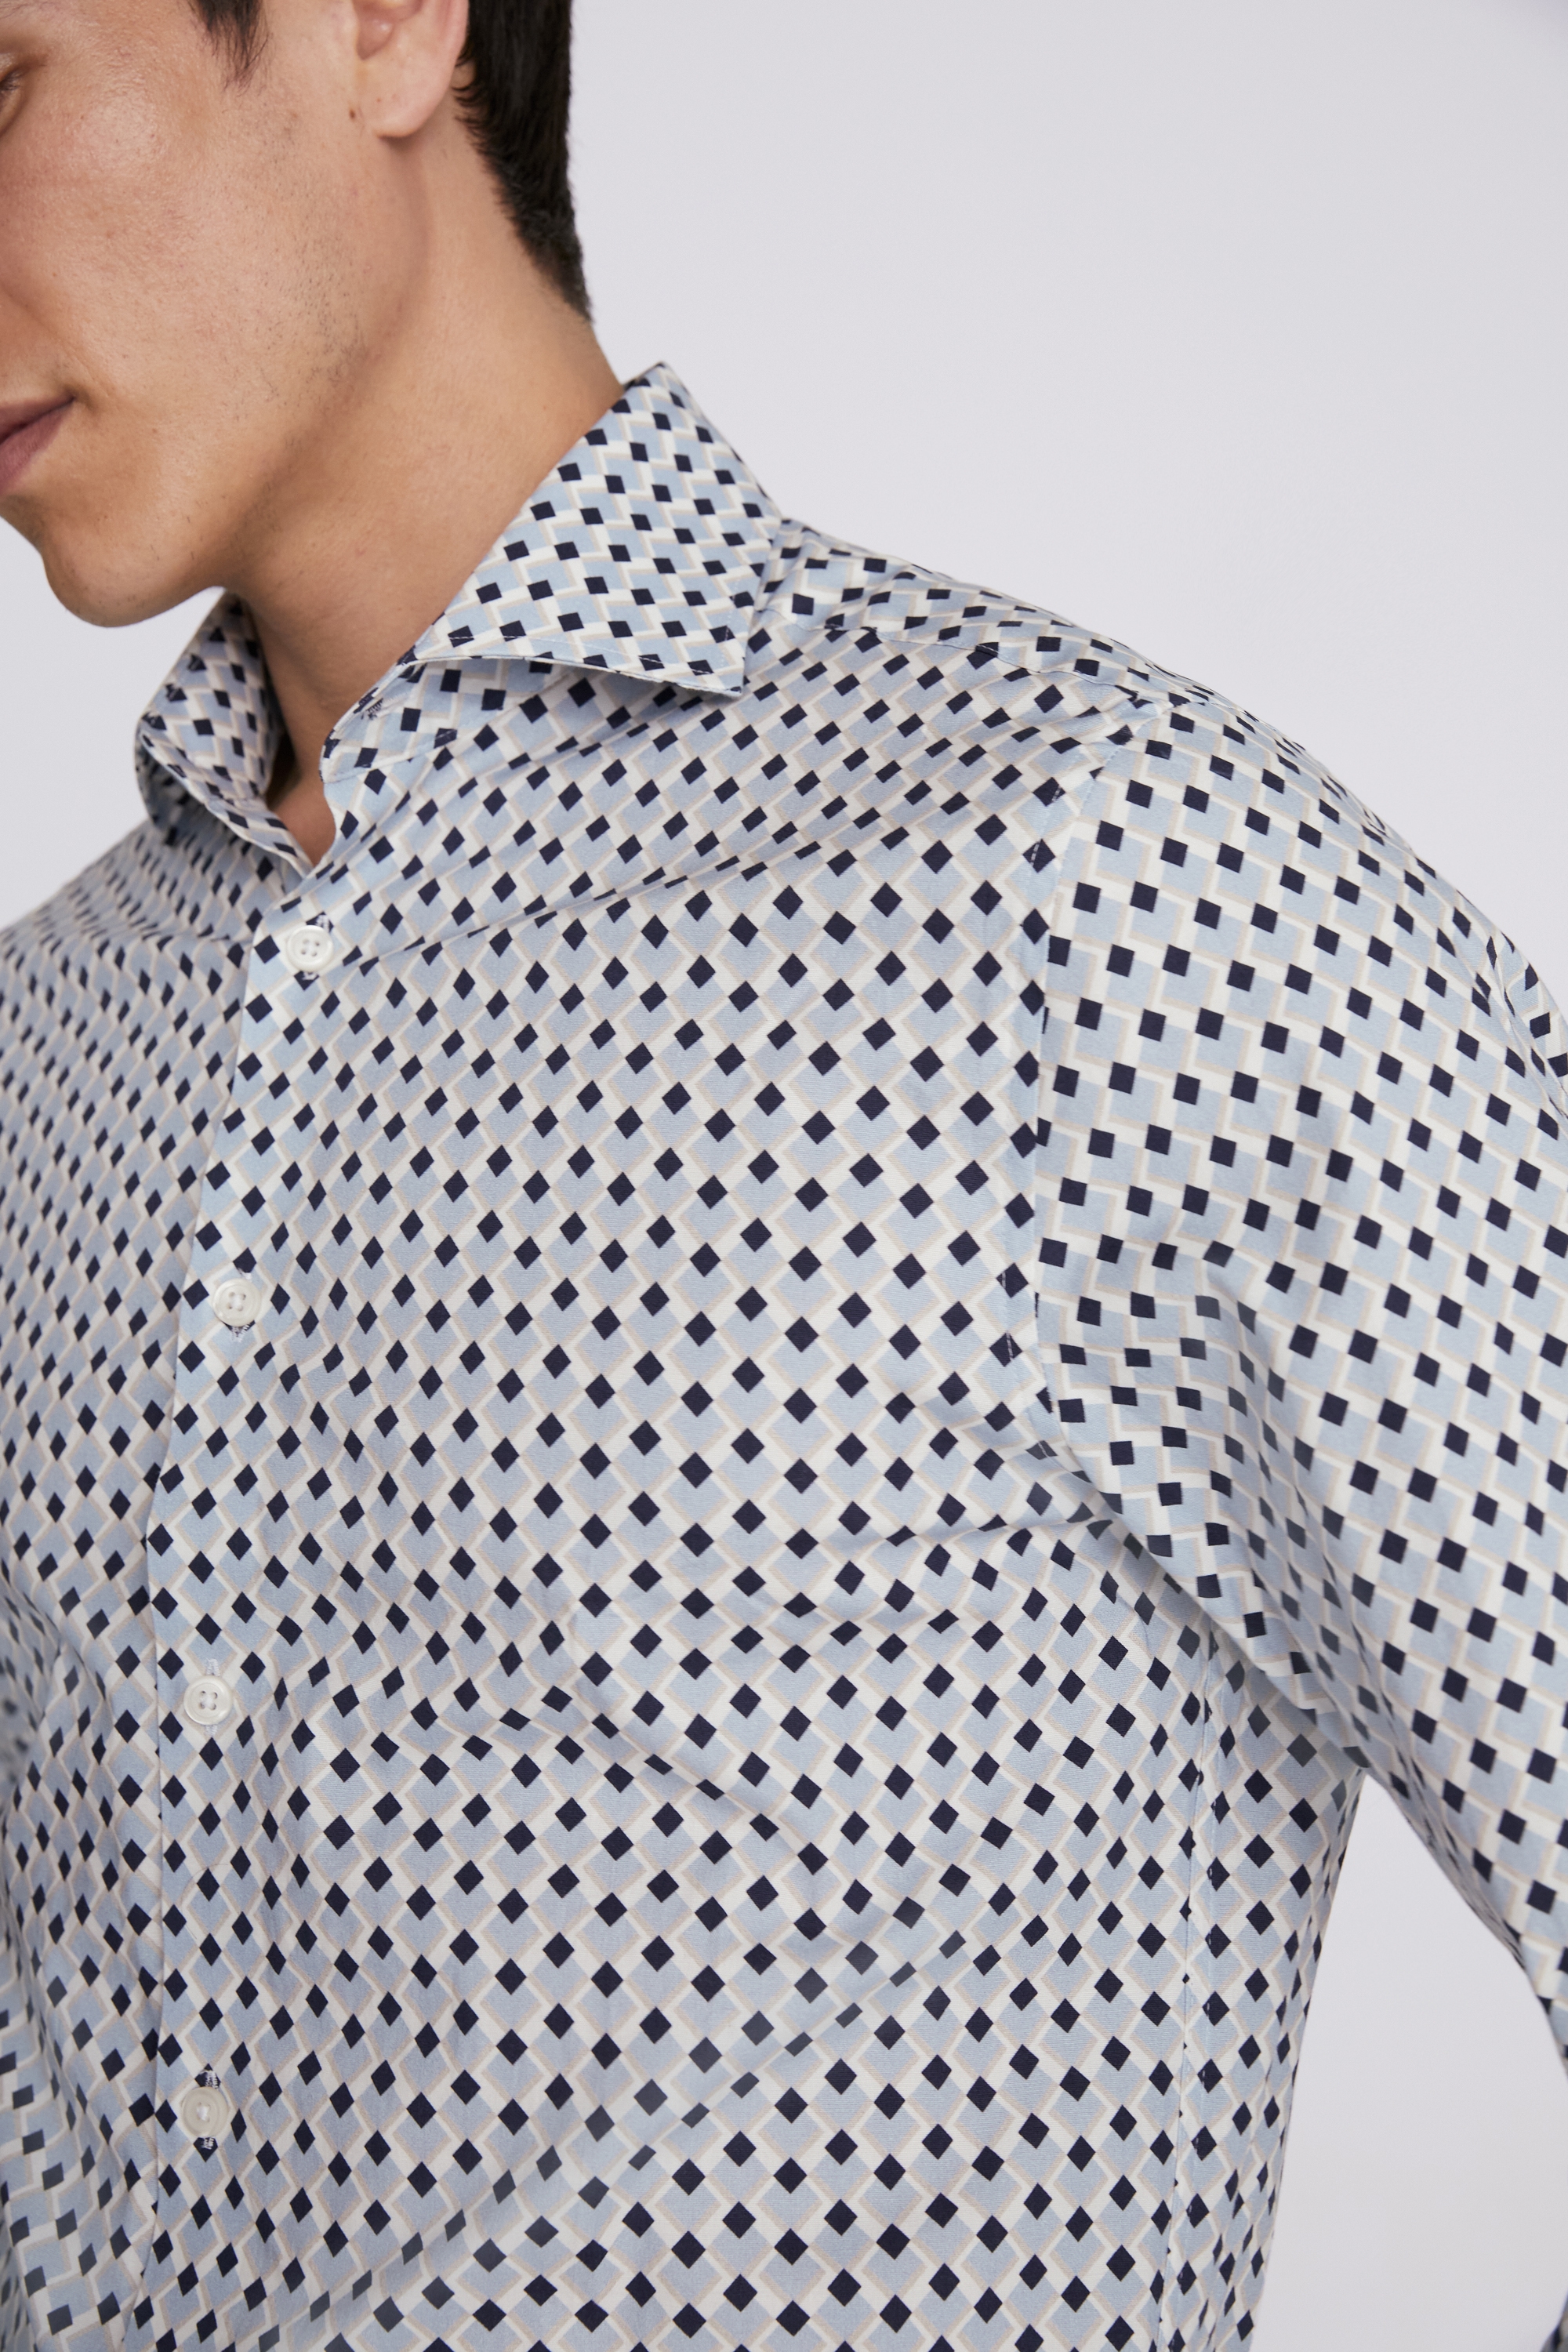 Tailored Fit Navy and Sky Diamond Print Stretch Shirt | Buy Online at Moss